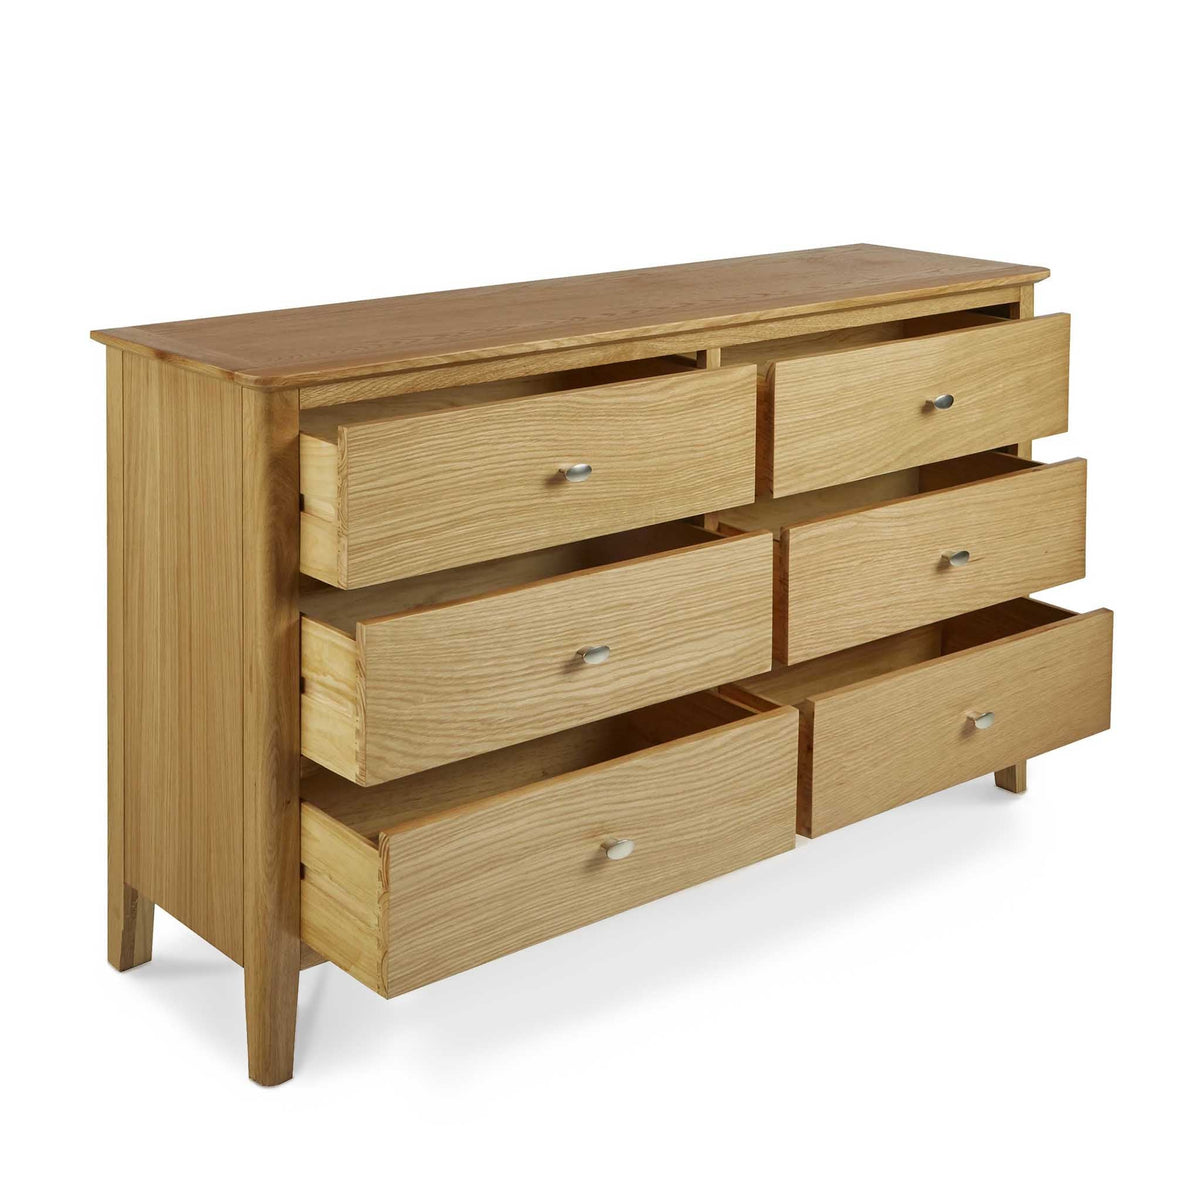 Alba Oak 6 Drawer Chest of Drawers - Side view with Drawers open